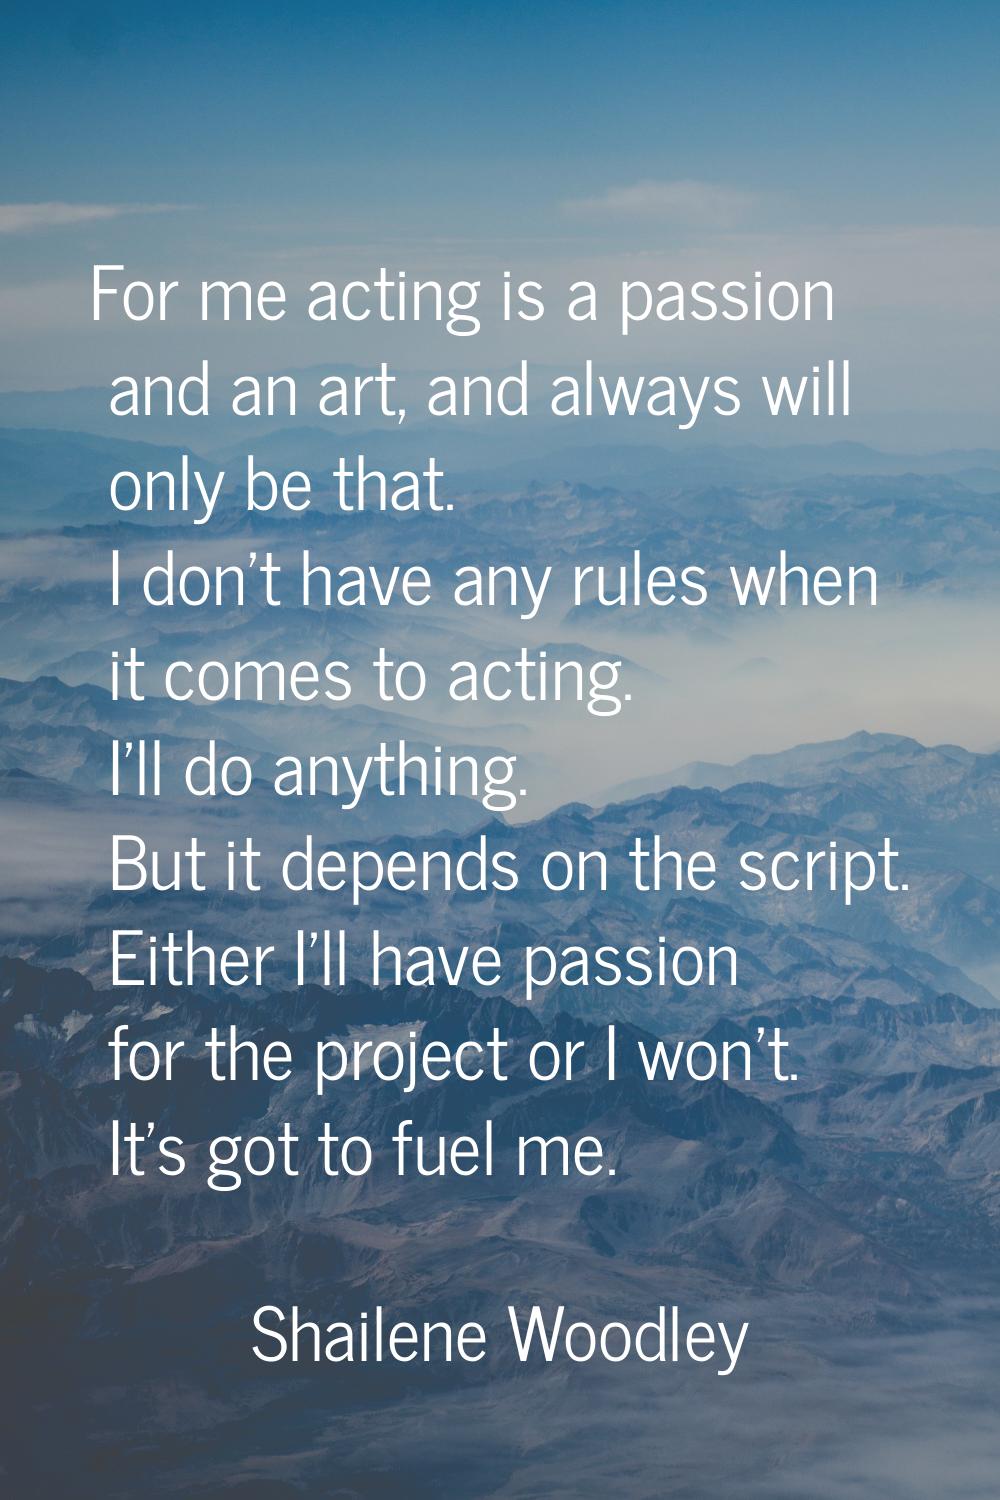 For me acting is a passion and an art, and always will only be that. I don't have any rules when it